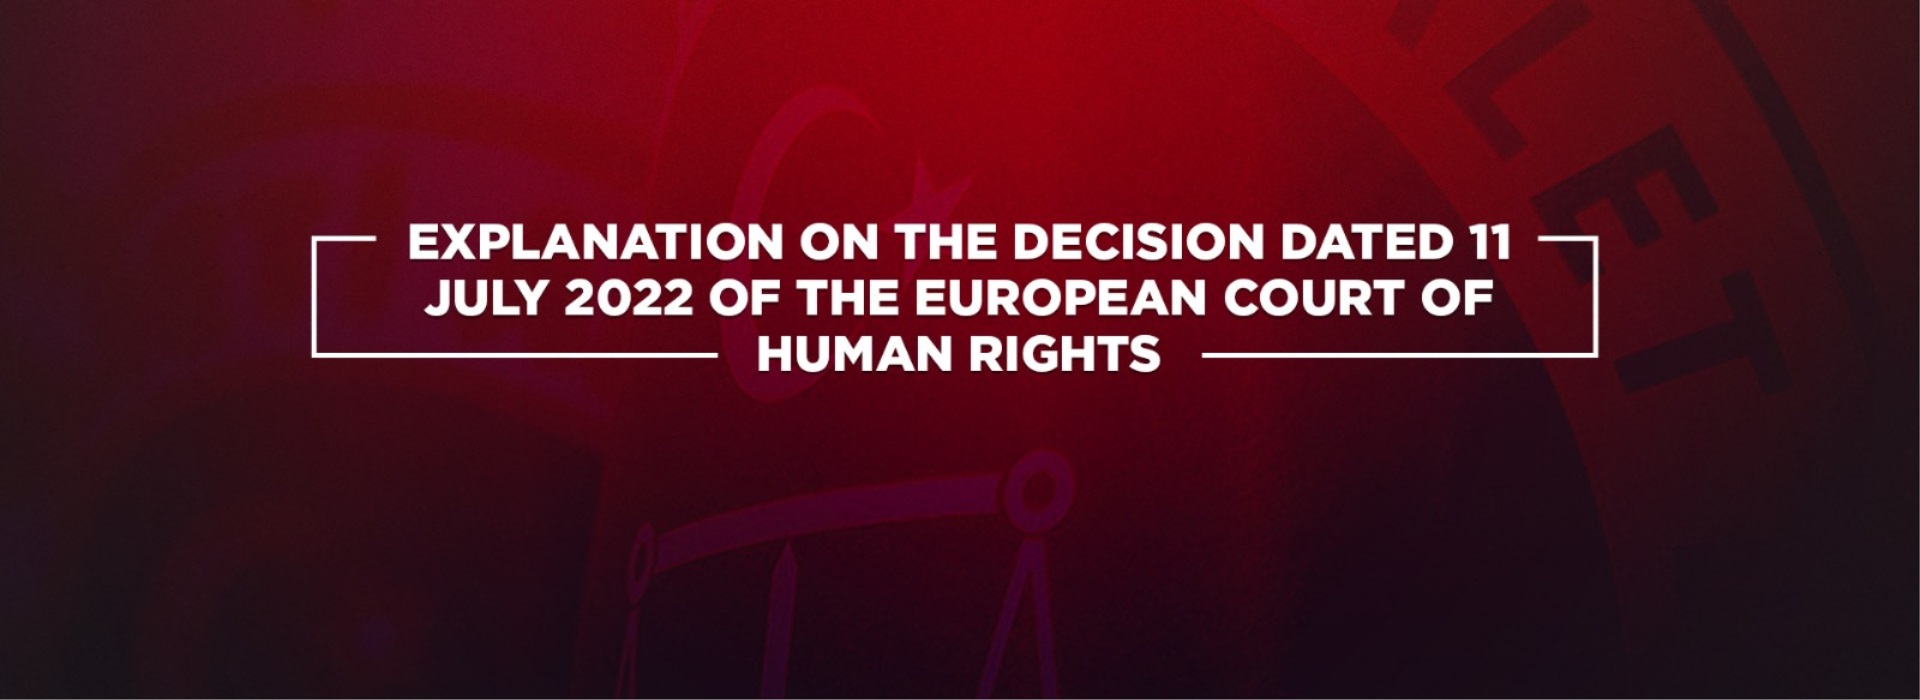 EXPLANATION ON THE DECISION DATED 11 JULY 2022 OF THE EUROPEAN COURT OF HUMAN RIGHTS Duyuru Görseli